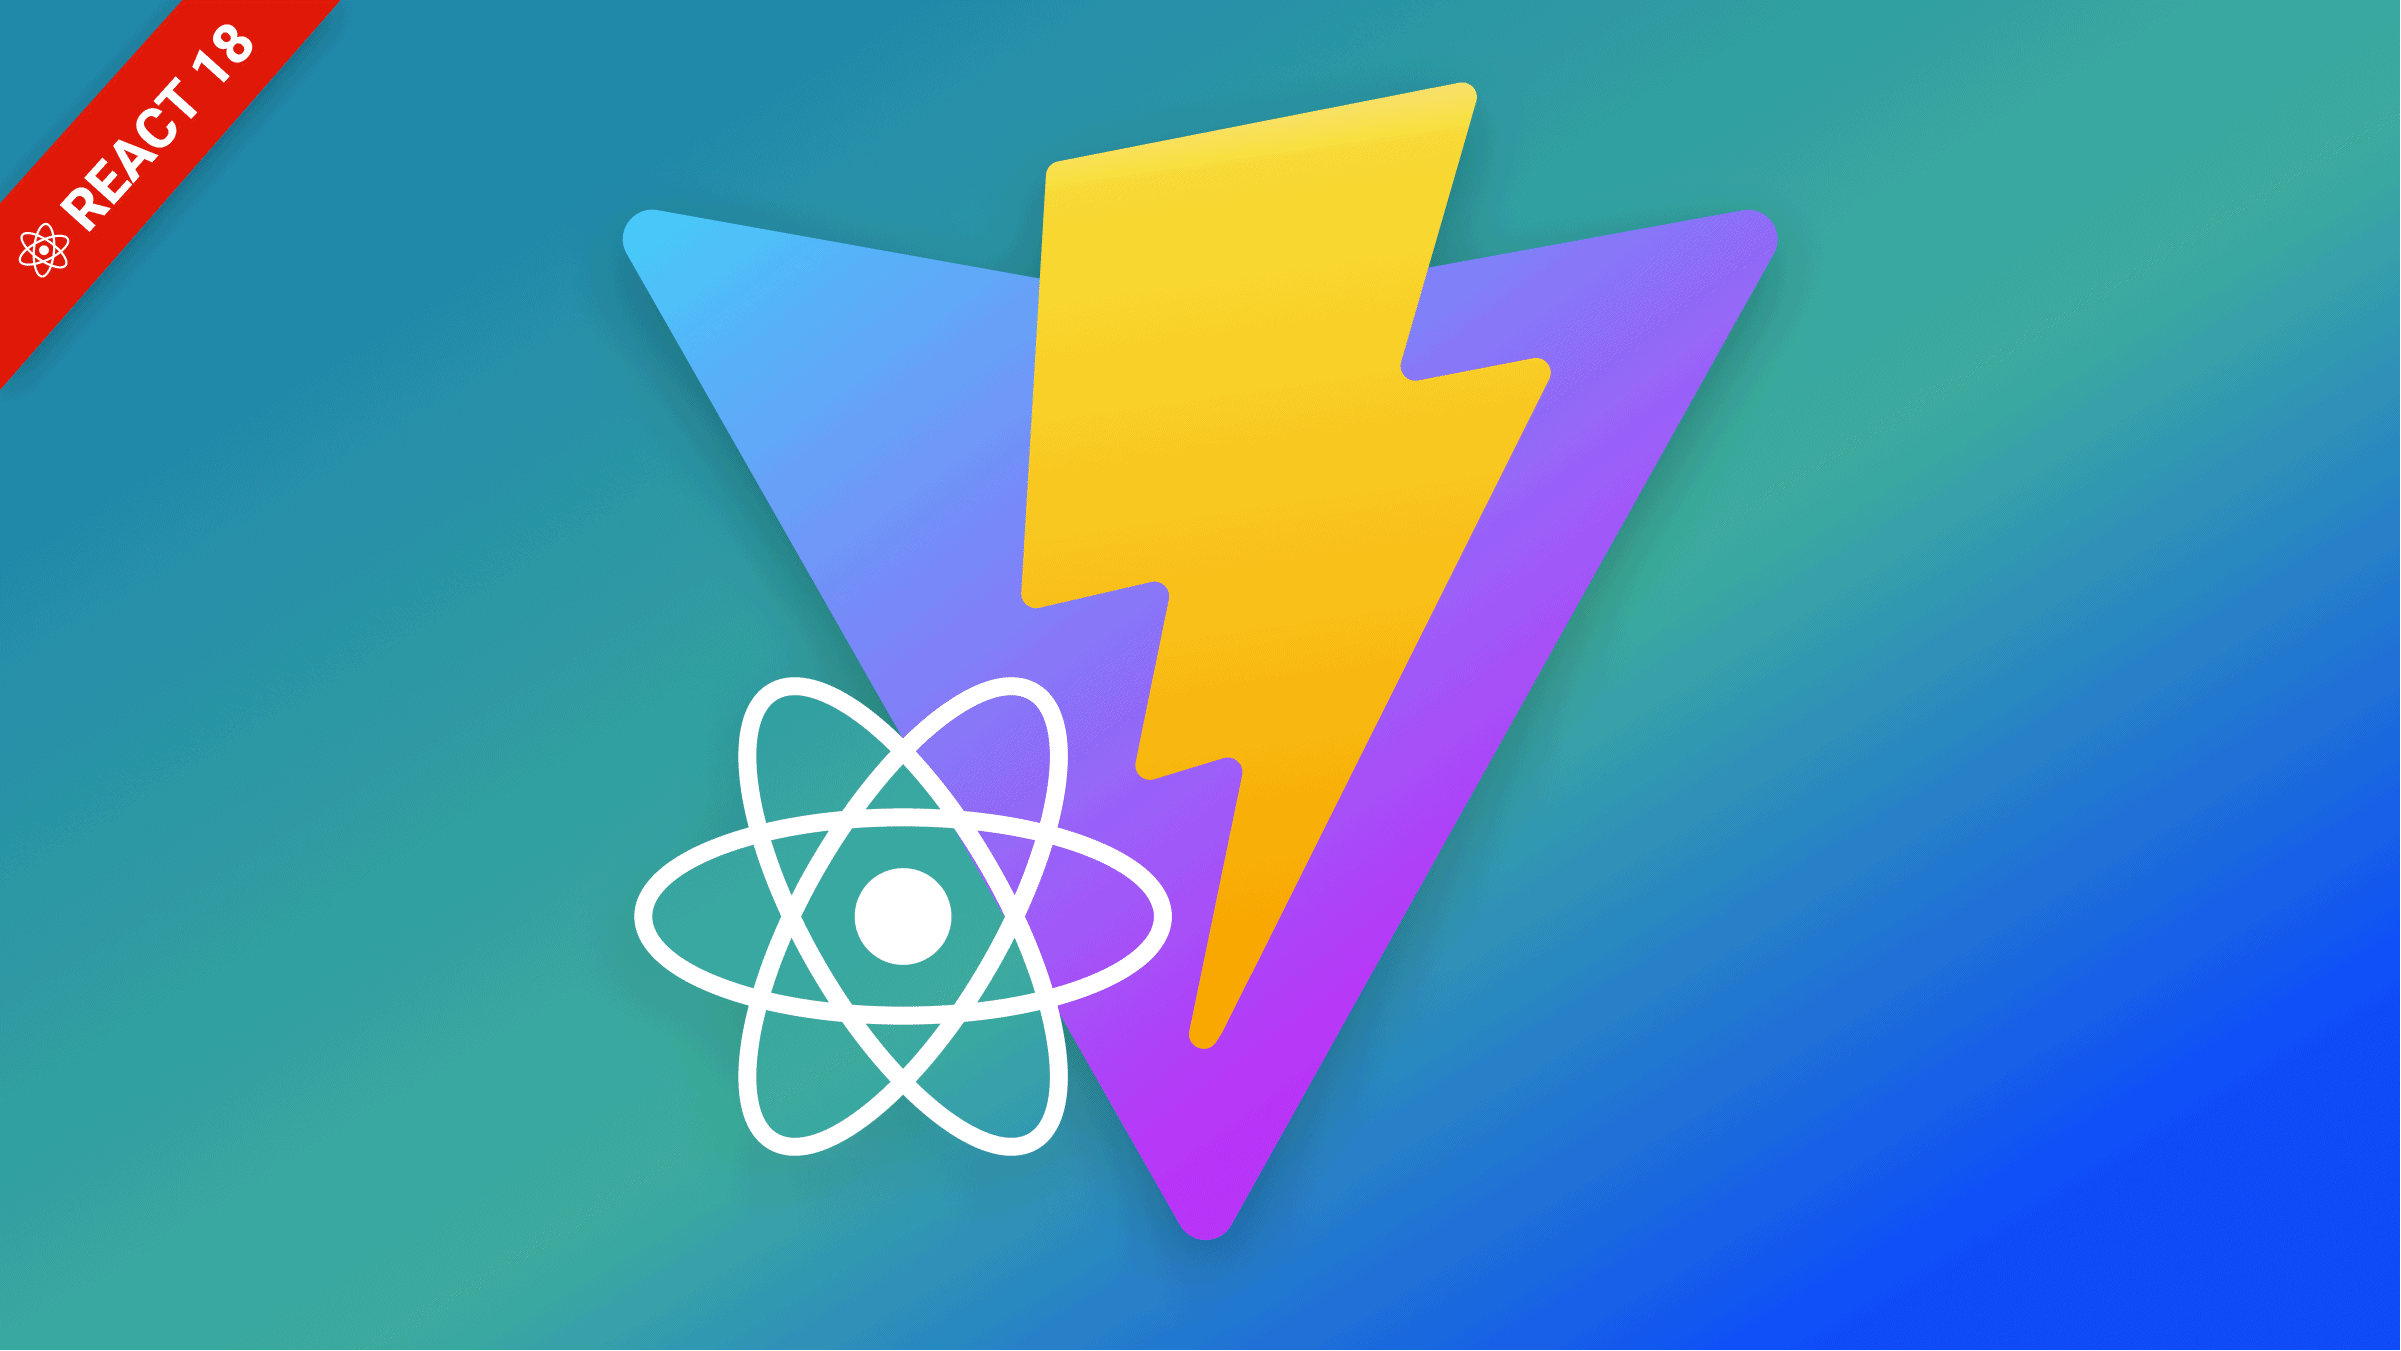 Building a React Application with Vite